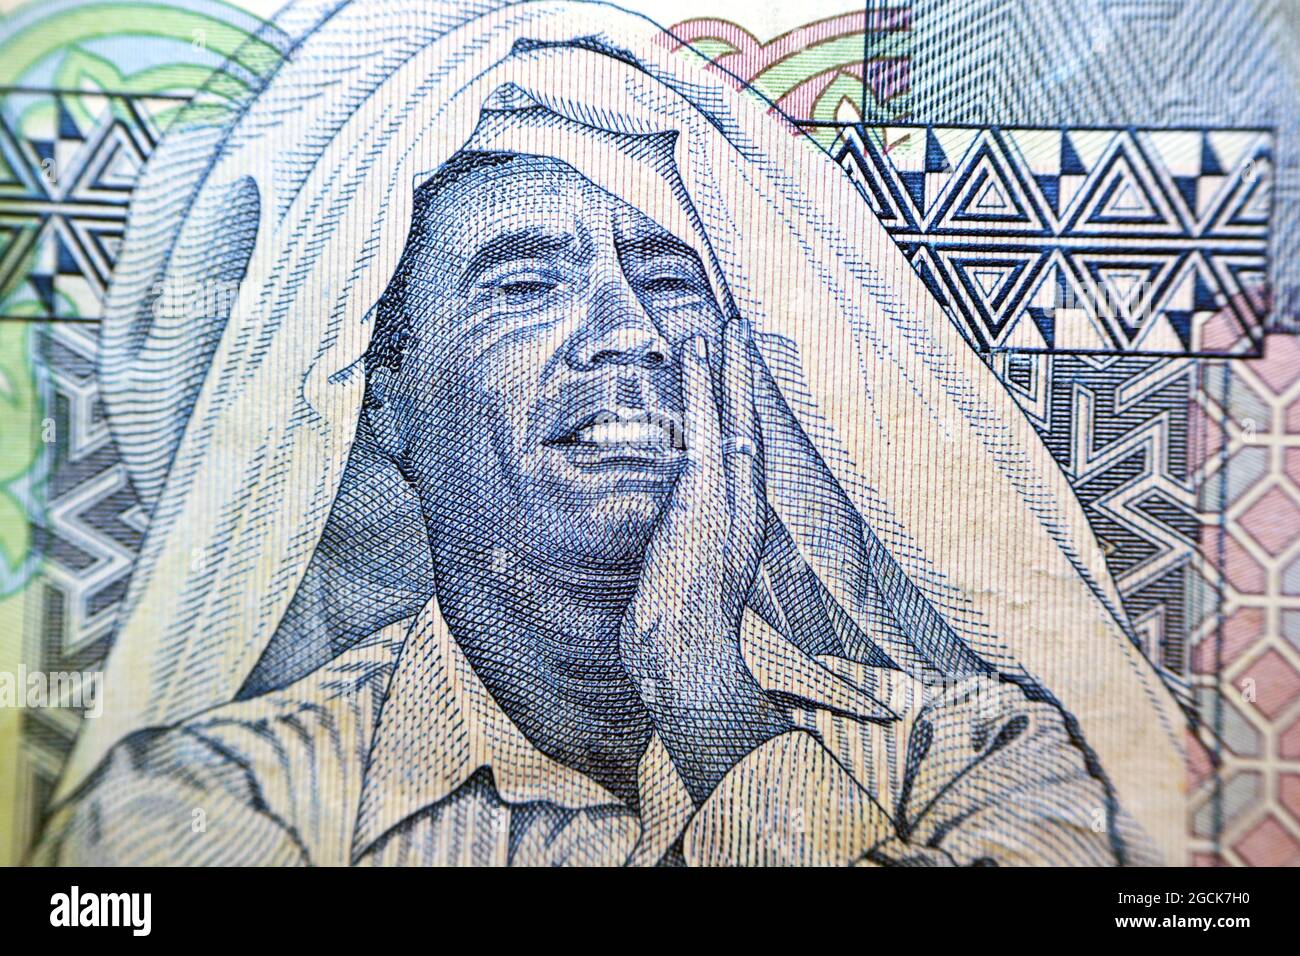 Muammar Al Gaddafi (1942-2011) The ruler of Libya from 1969 to 2011, The obverse side of the Libyan one dinar banknote Libyan money, Close up Macro Stock Photo